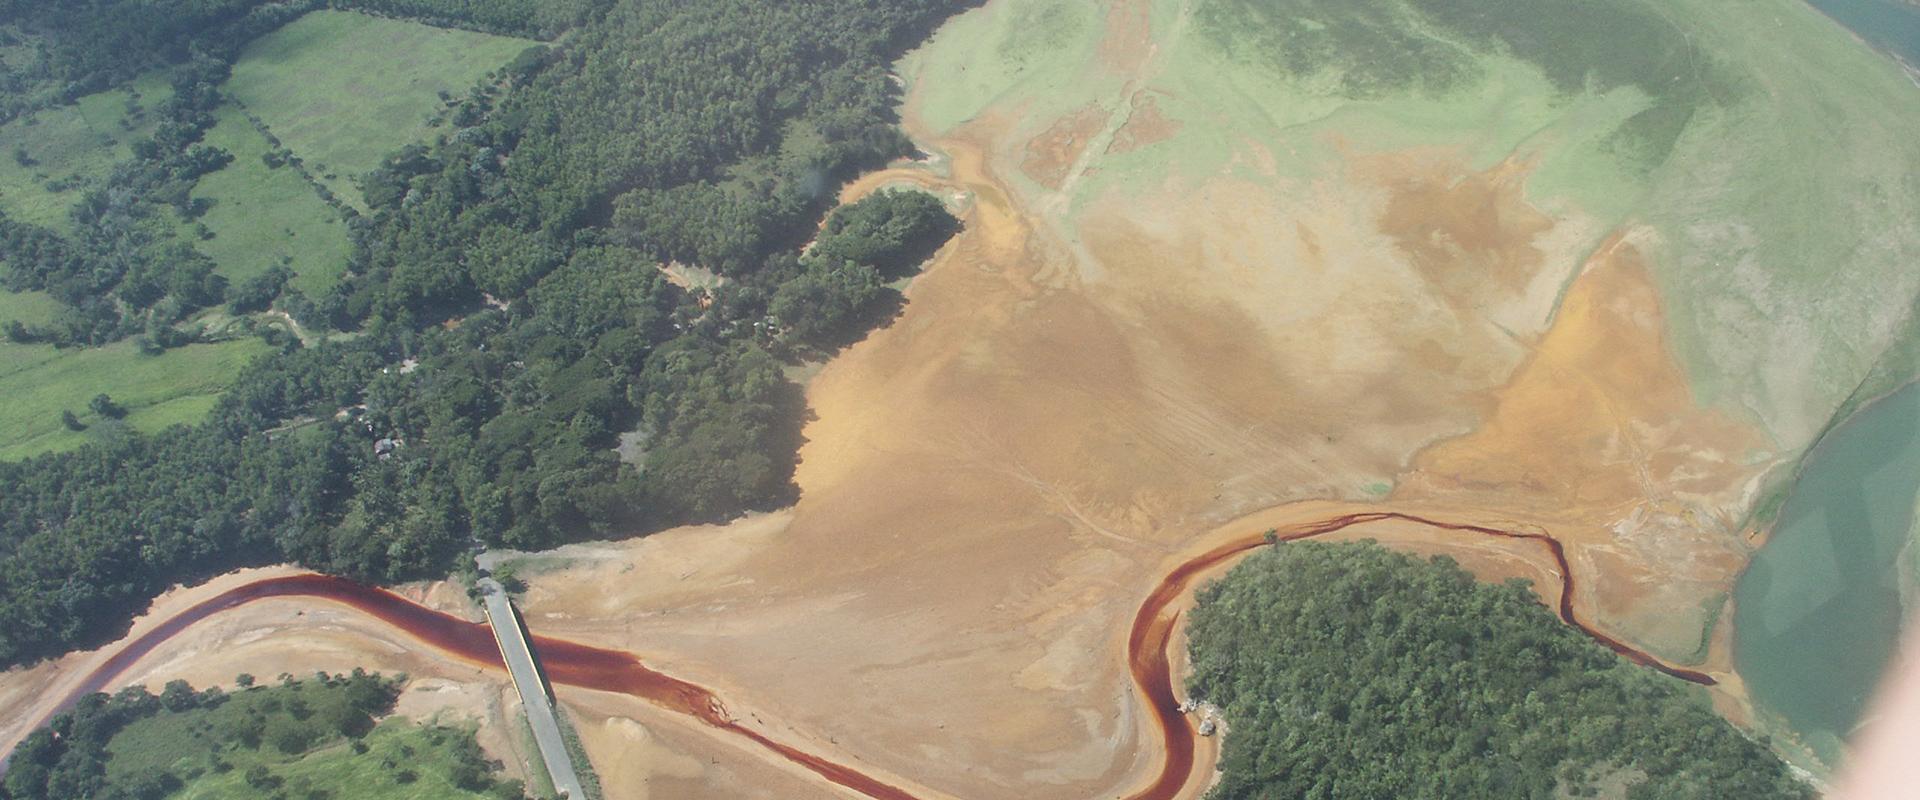 View of polluted sediment, Dominican Republic